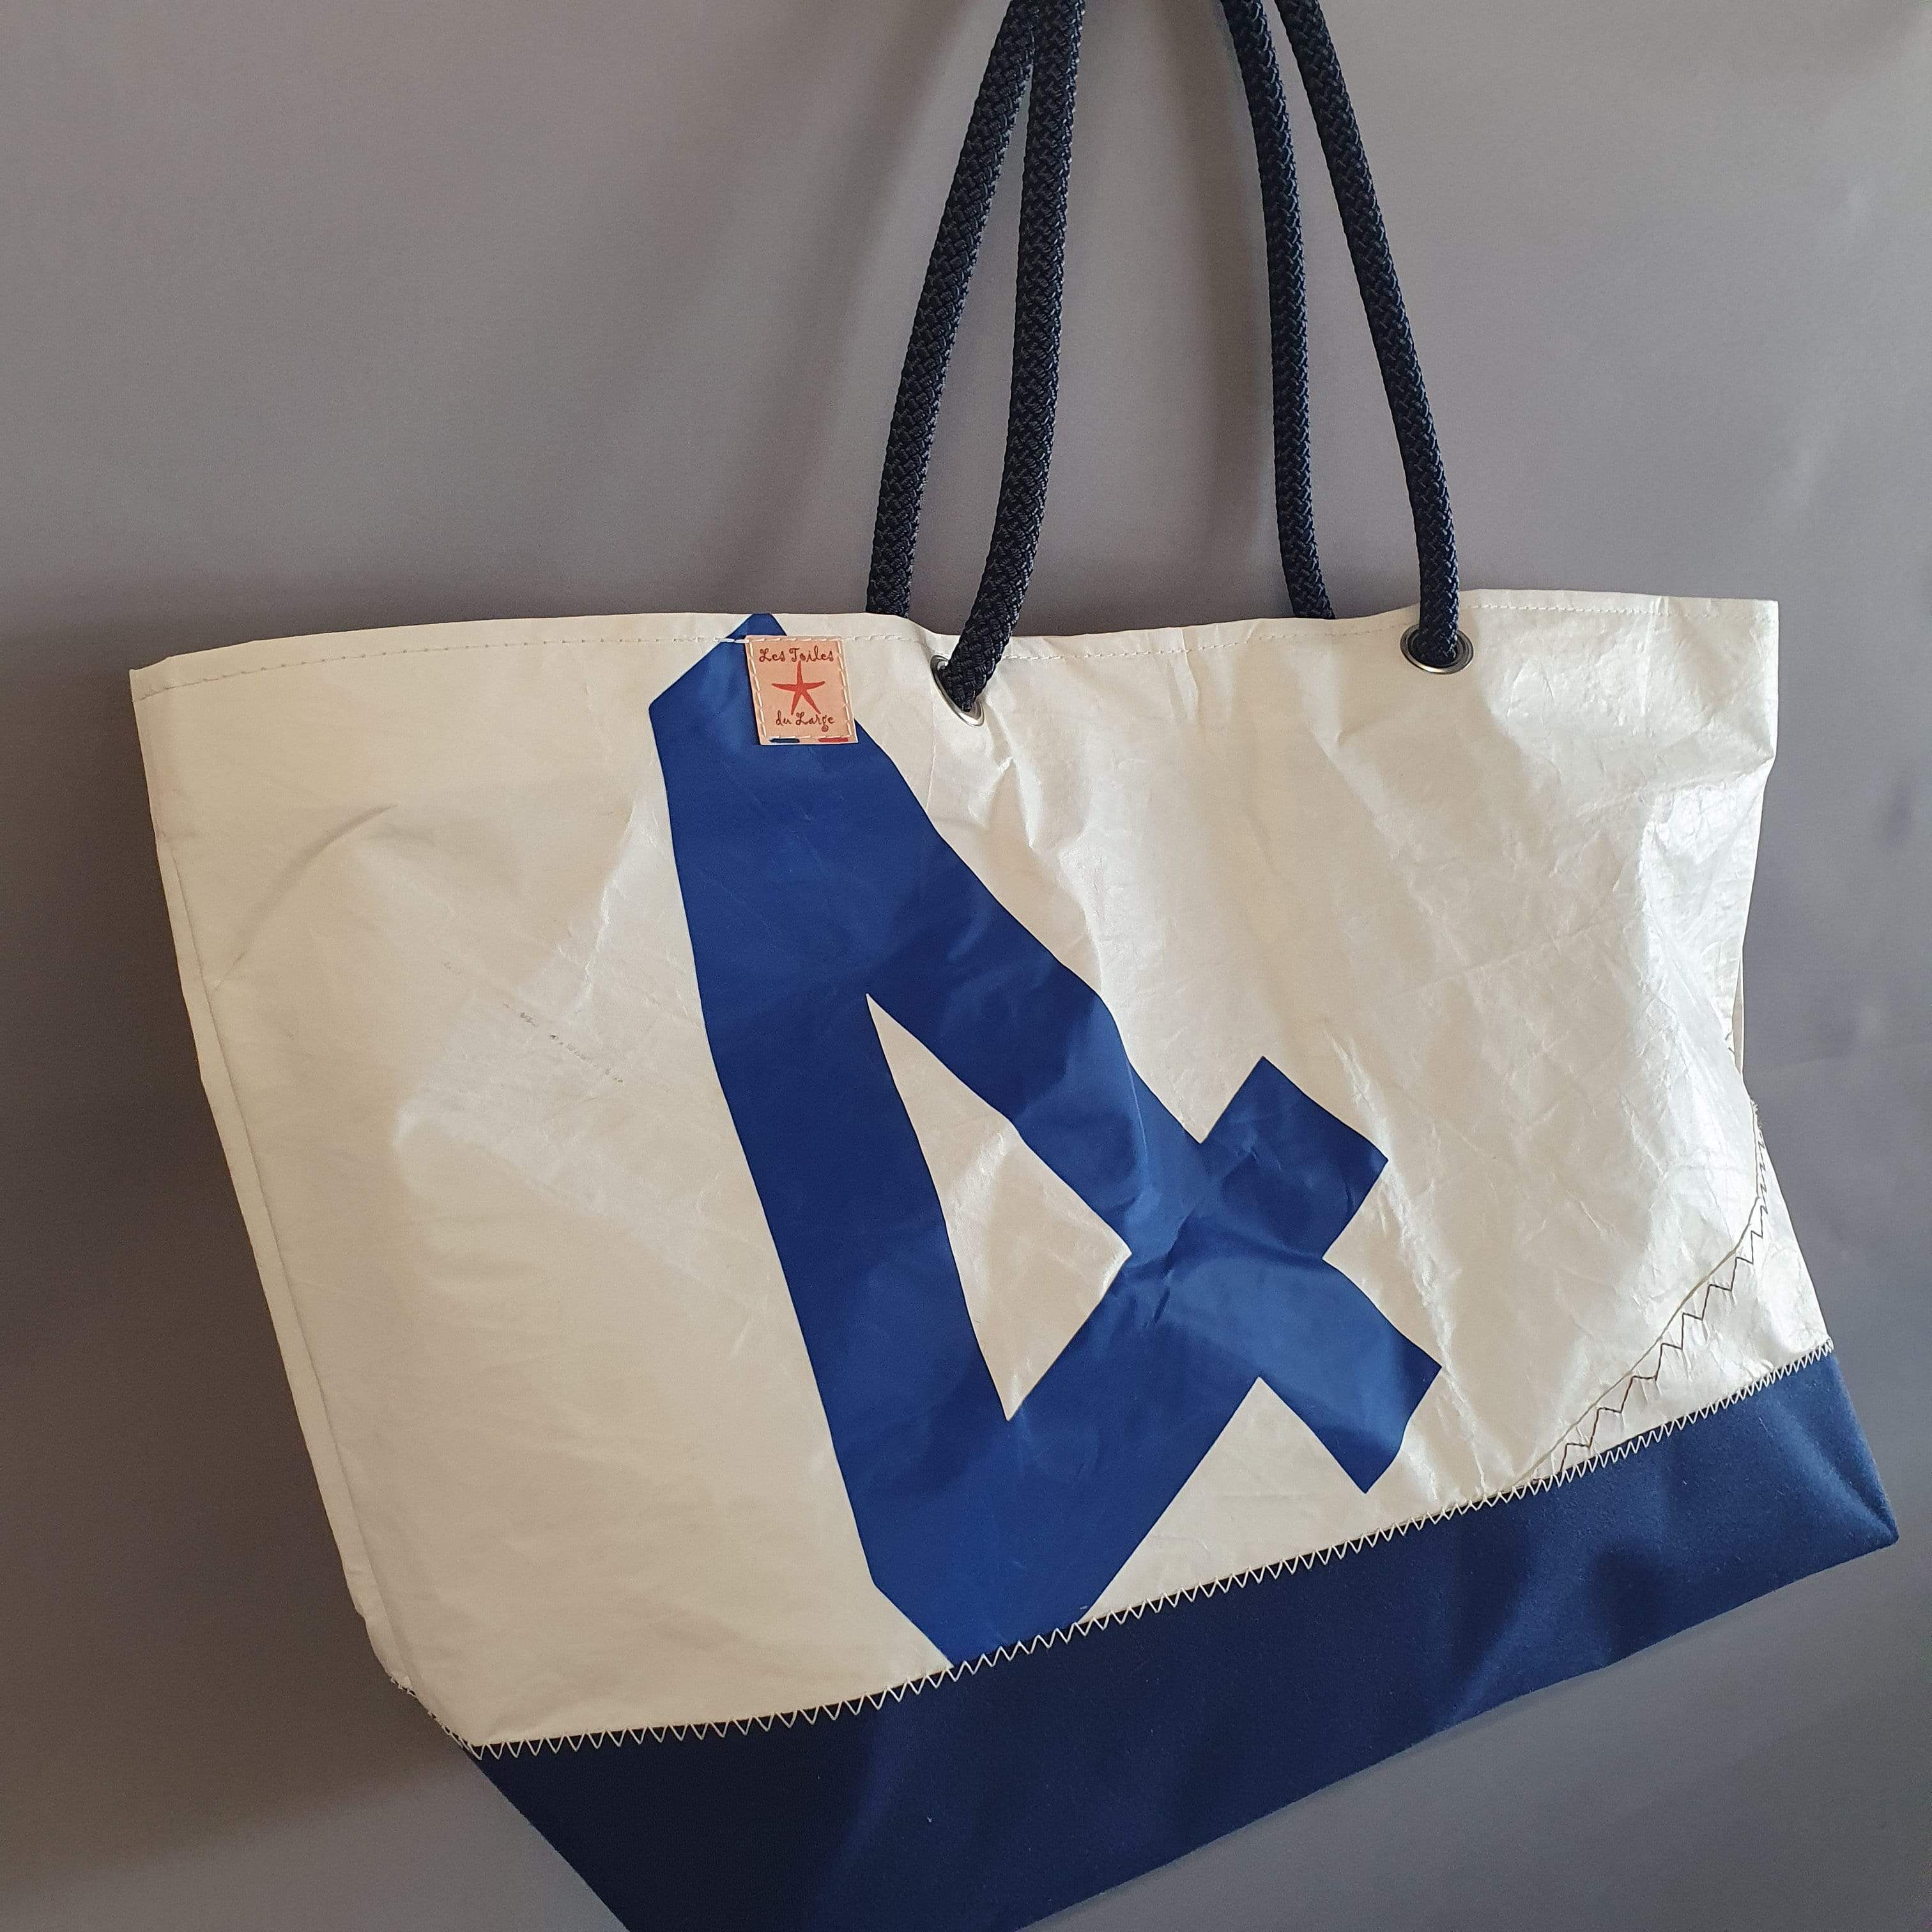 Etsy - About sewswelldesigns - old windsurfing sails turned into tote bags!  | Sail bag, Kite surfing, Recycled plastic bags